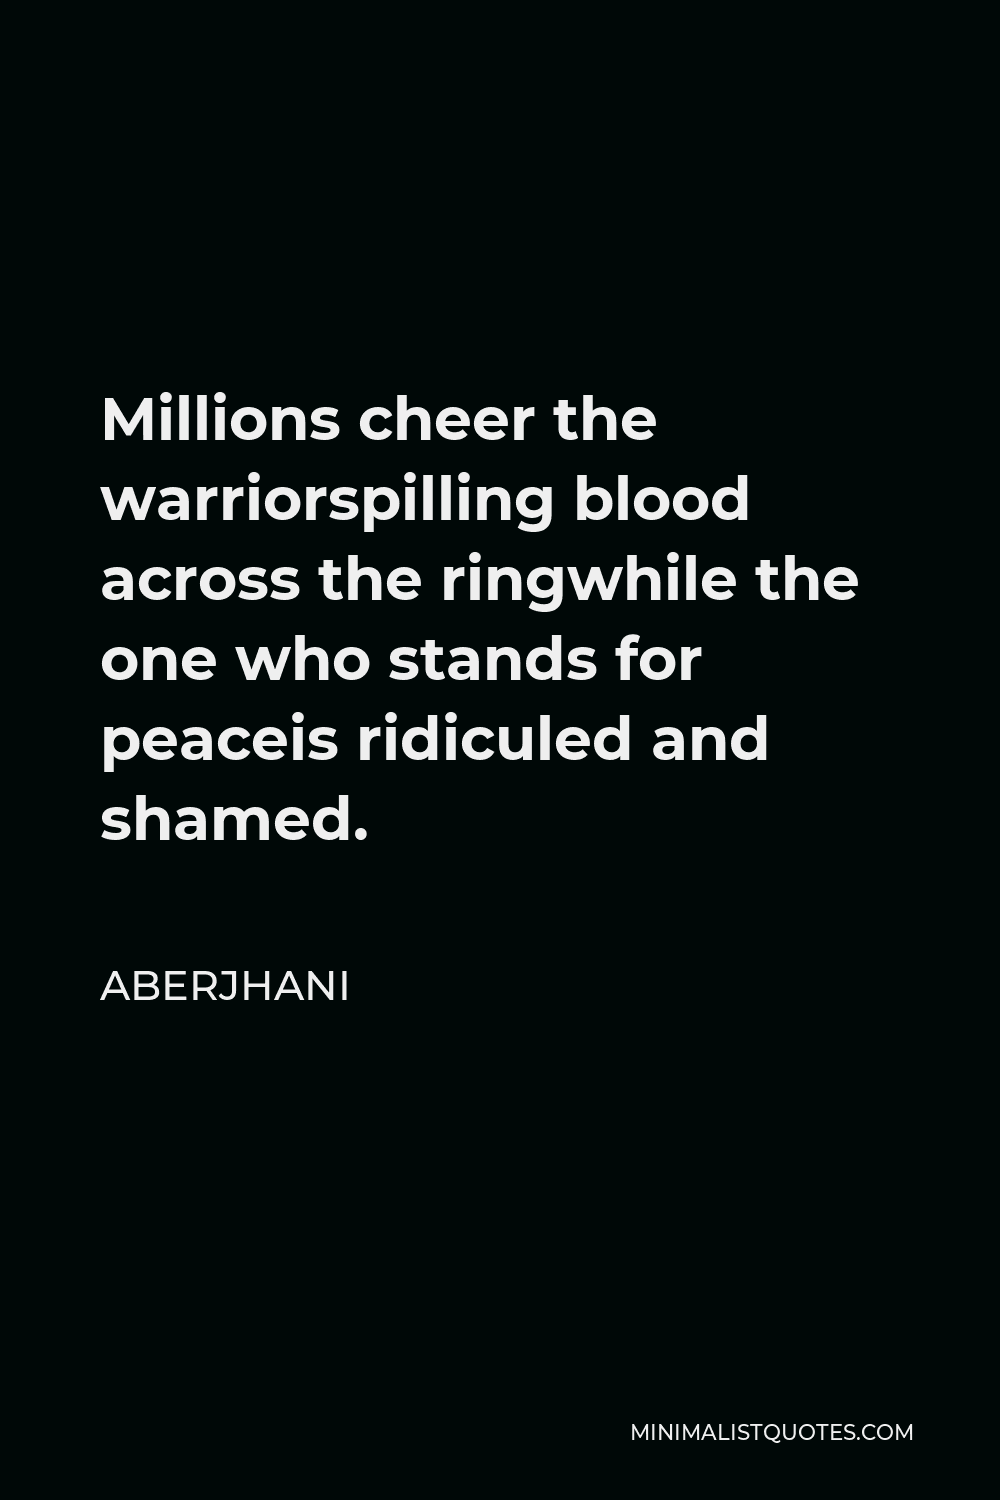 Aberjhani Quote - Millions cheer the warriorspilling blood across the ringwhile the one who stands for peaceis ridiculed and shamed.